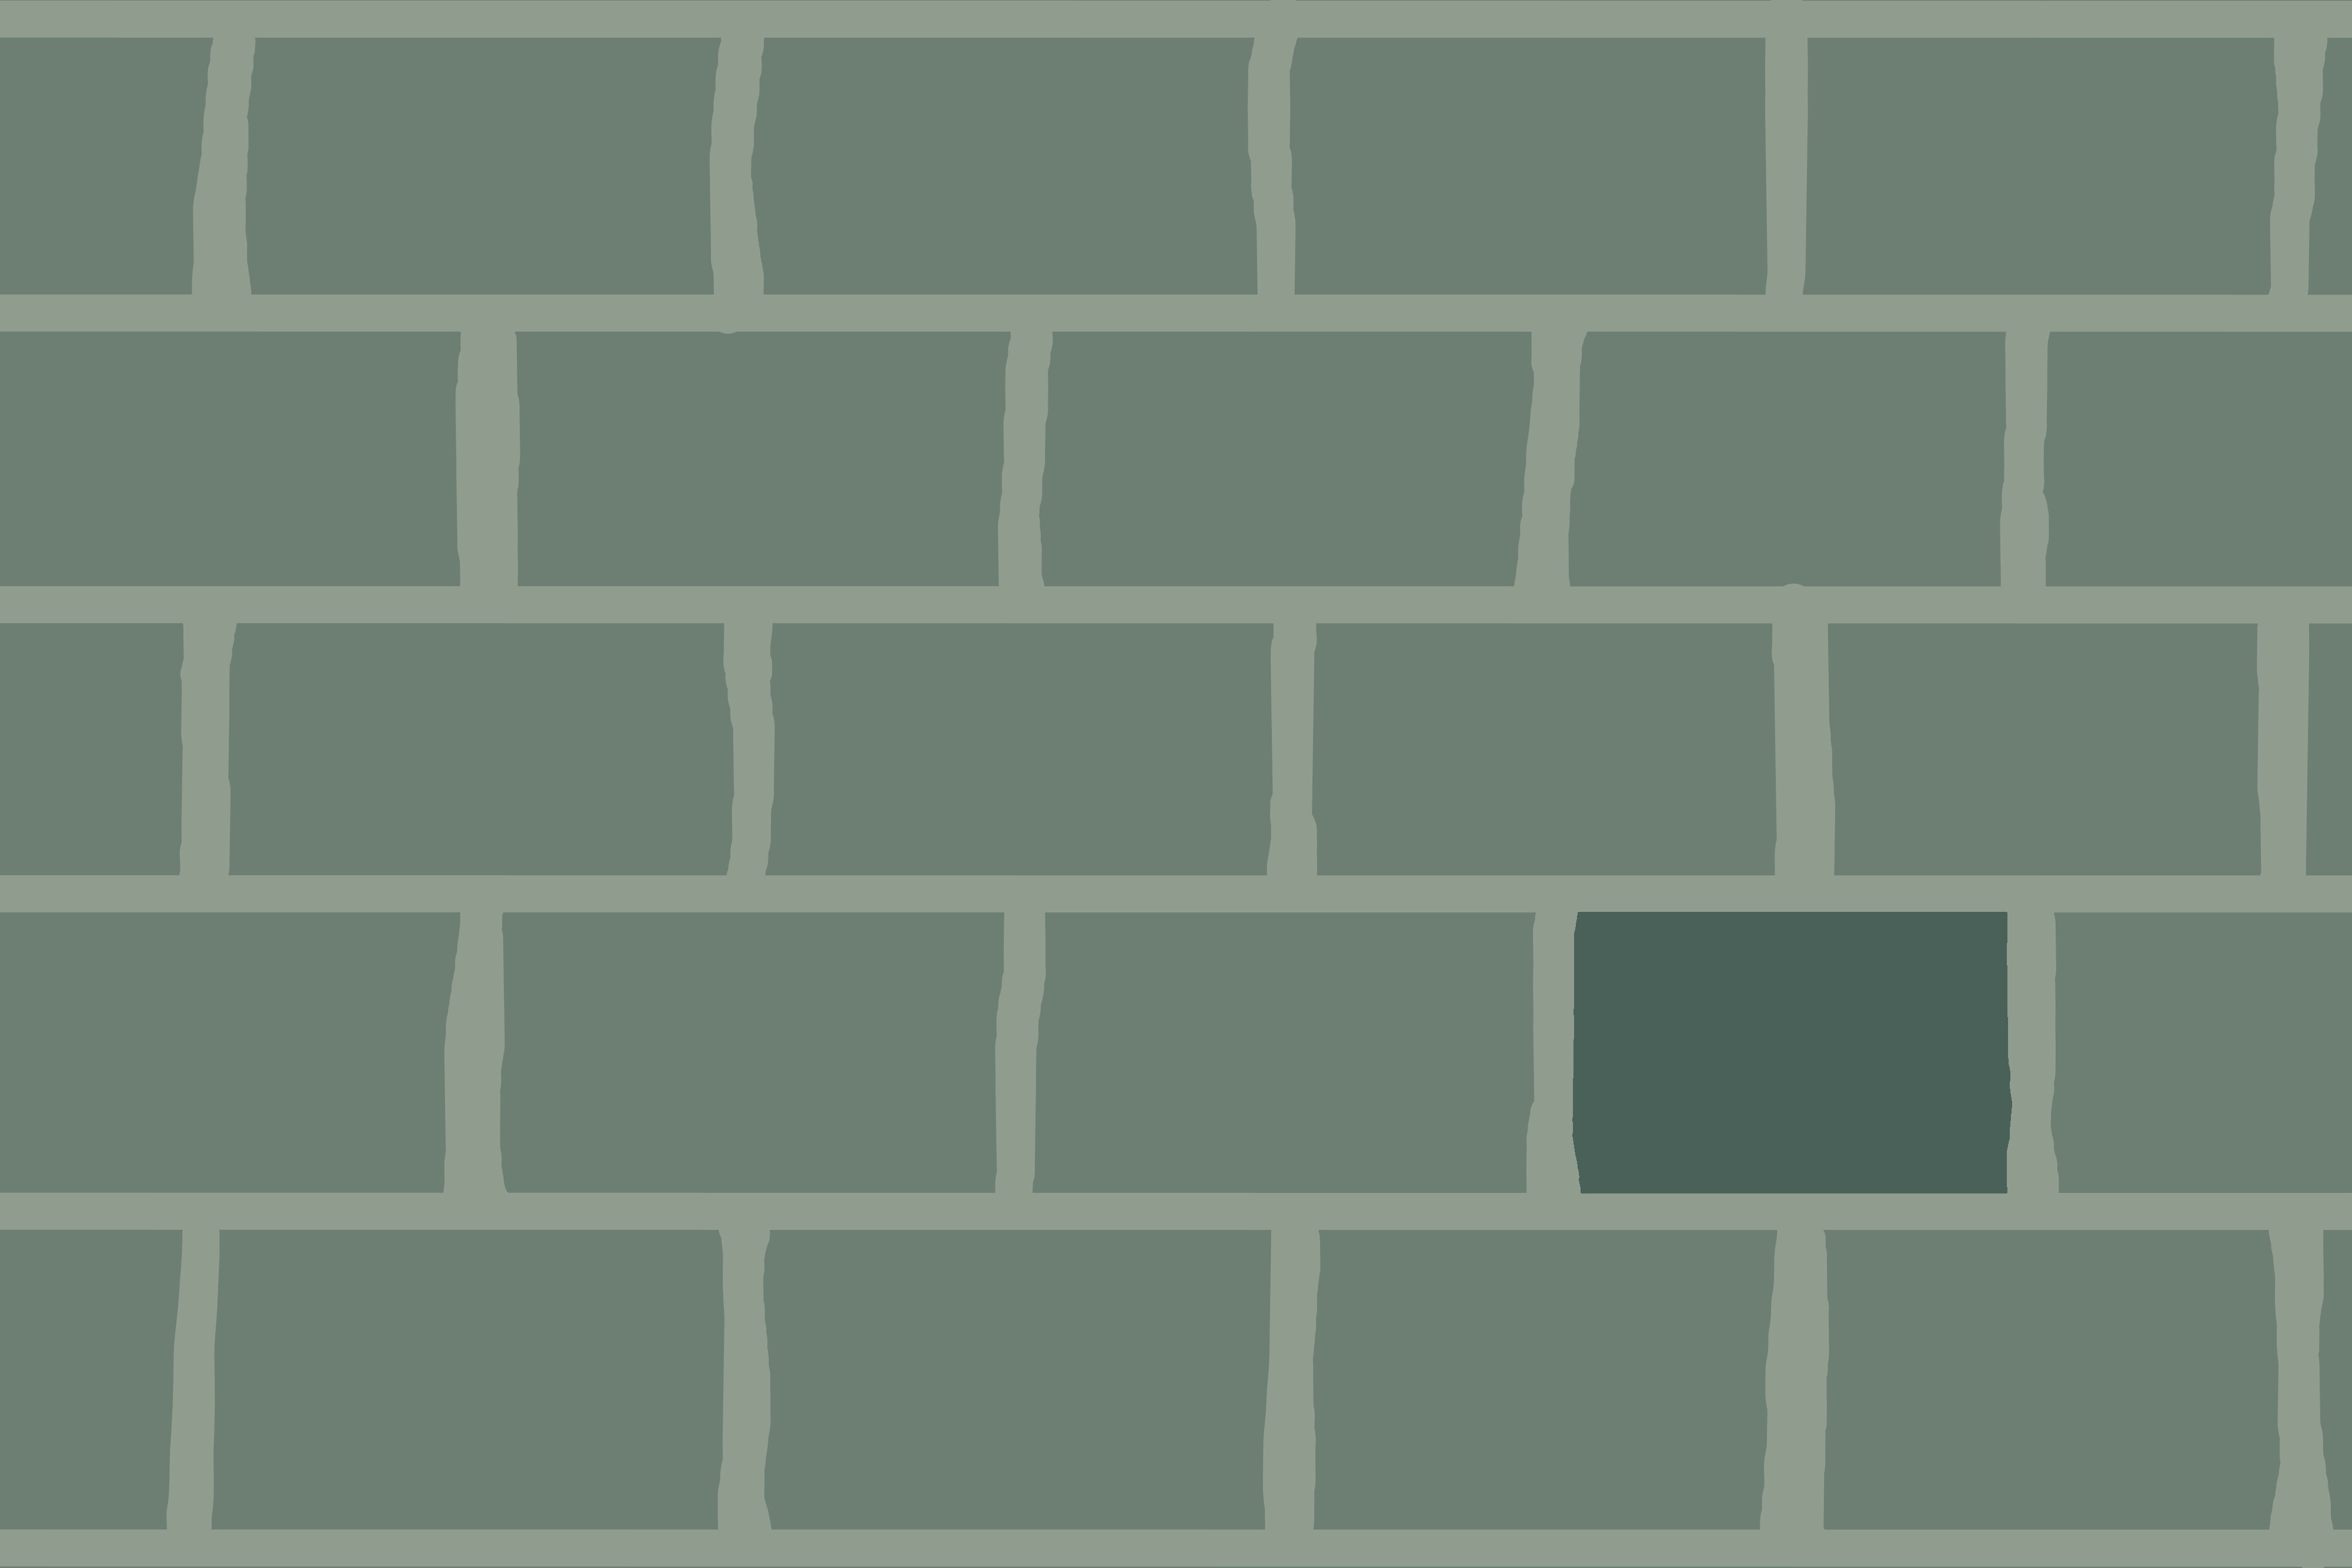 simple drawing of a brick wall with one brick highlighted